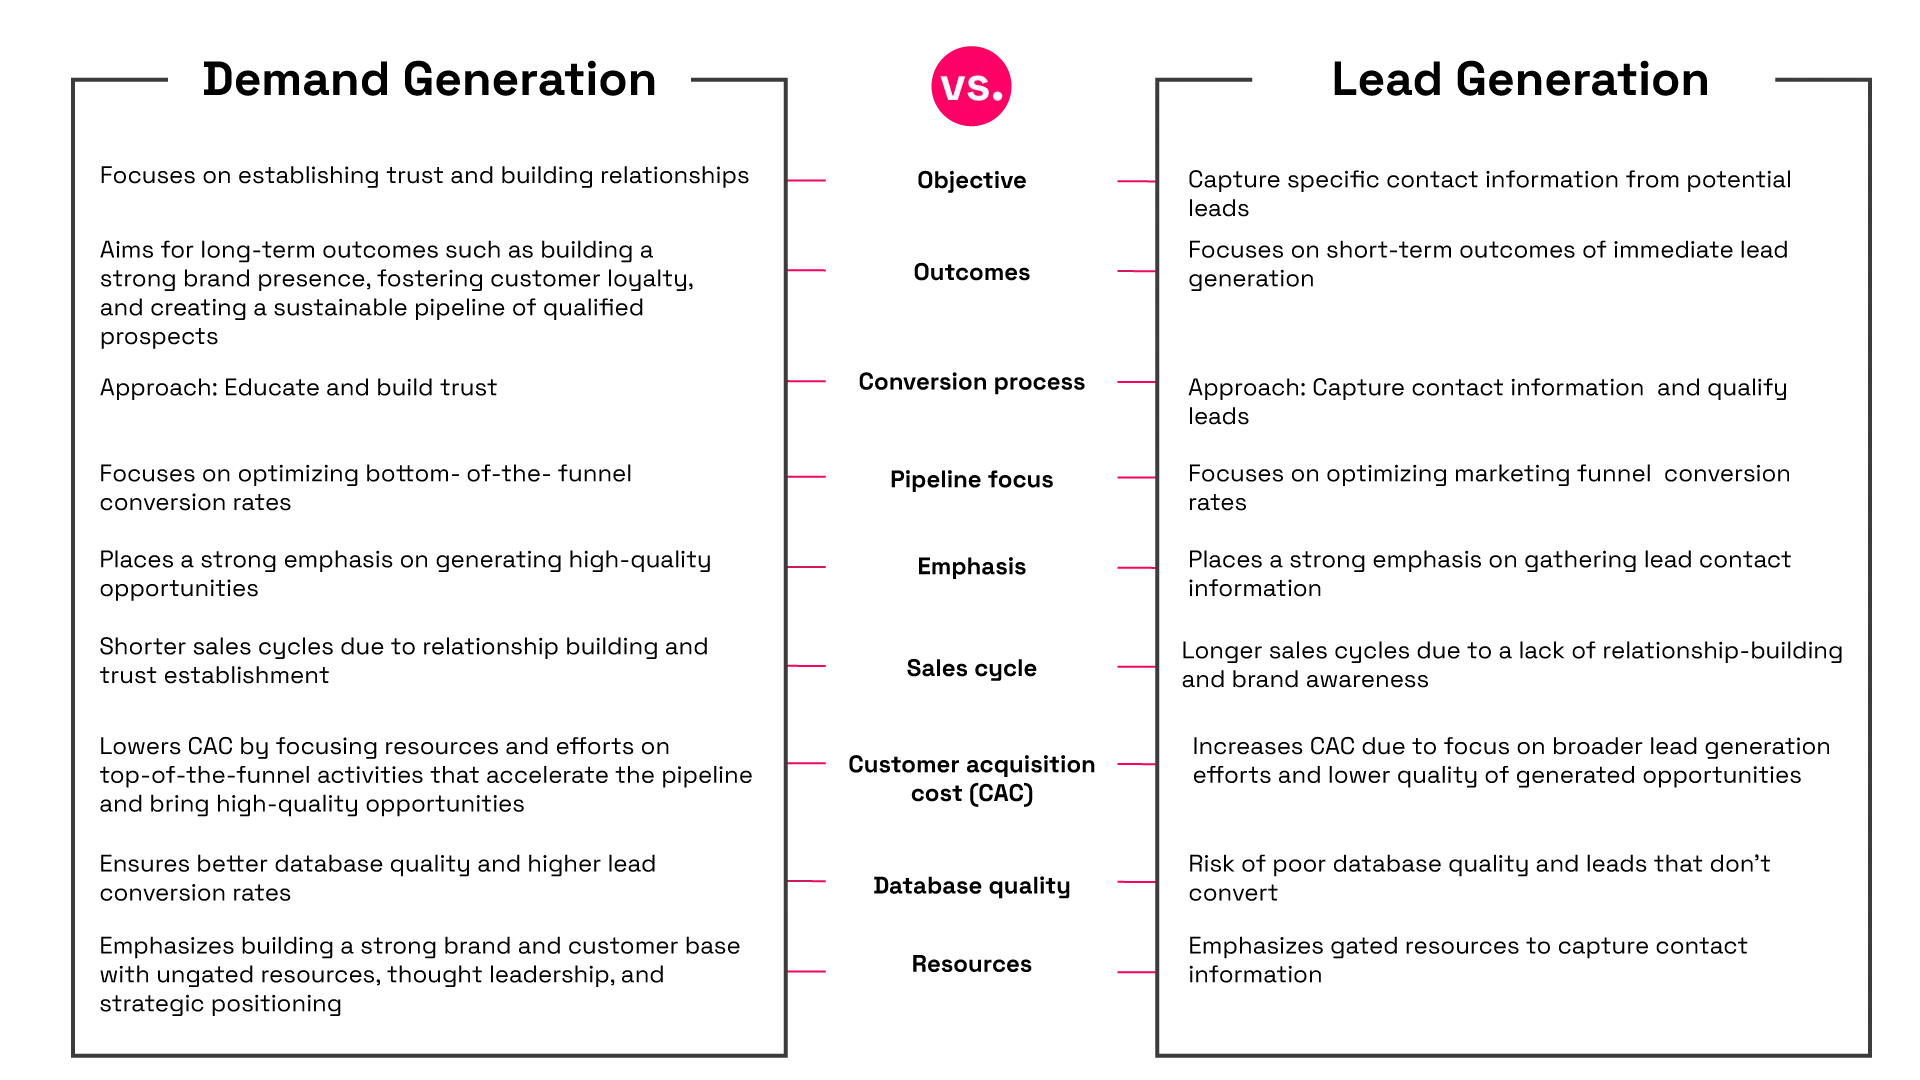 Comparison table showing the differences between lead generation and demand generation strategies